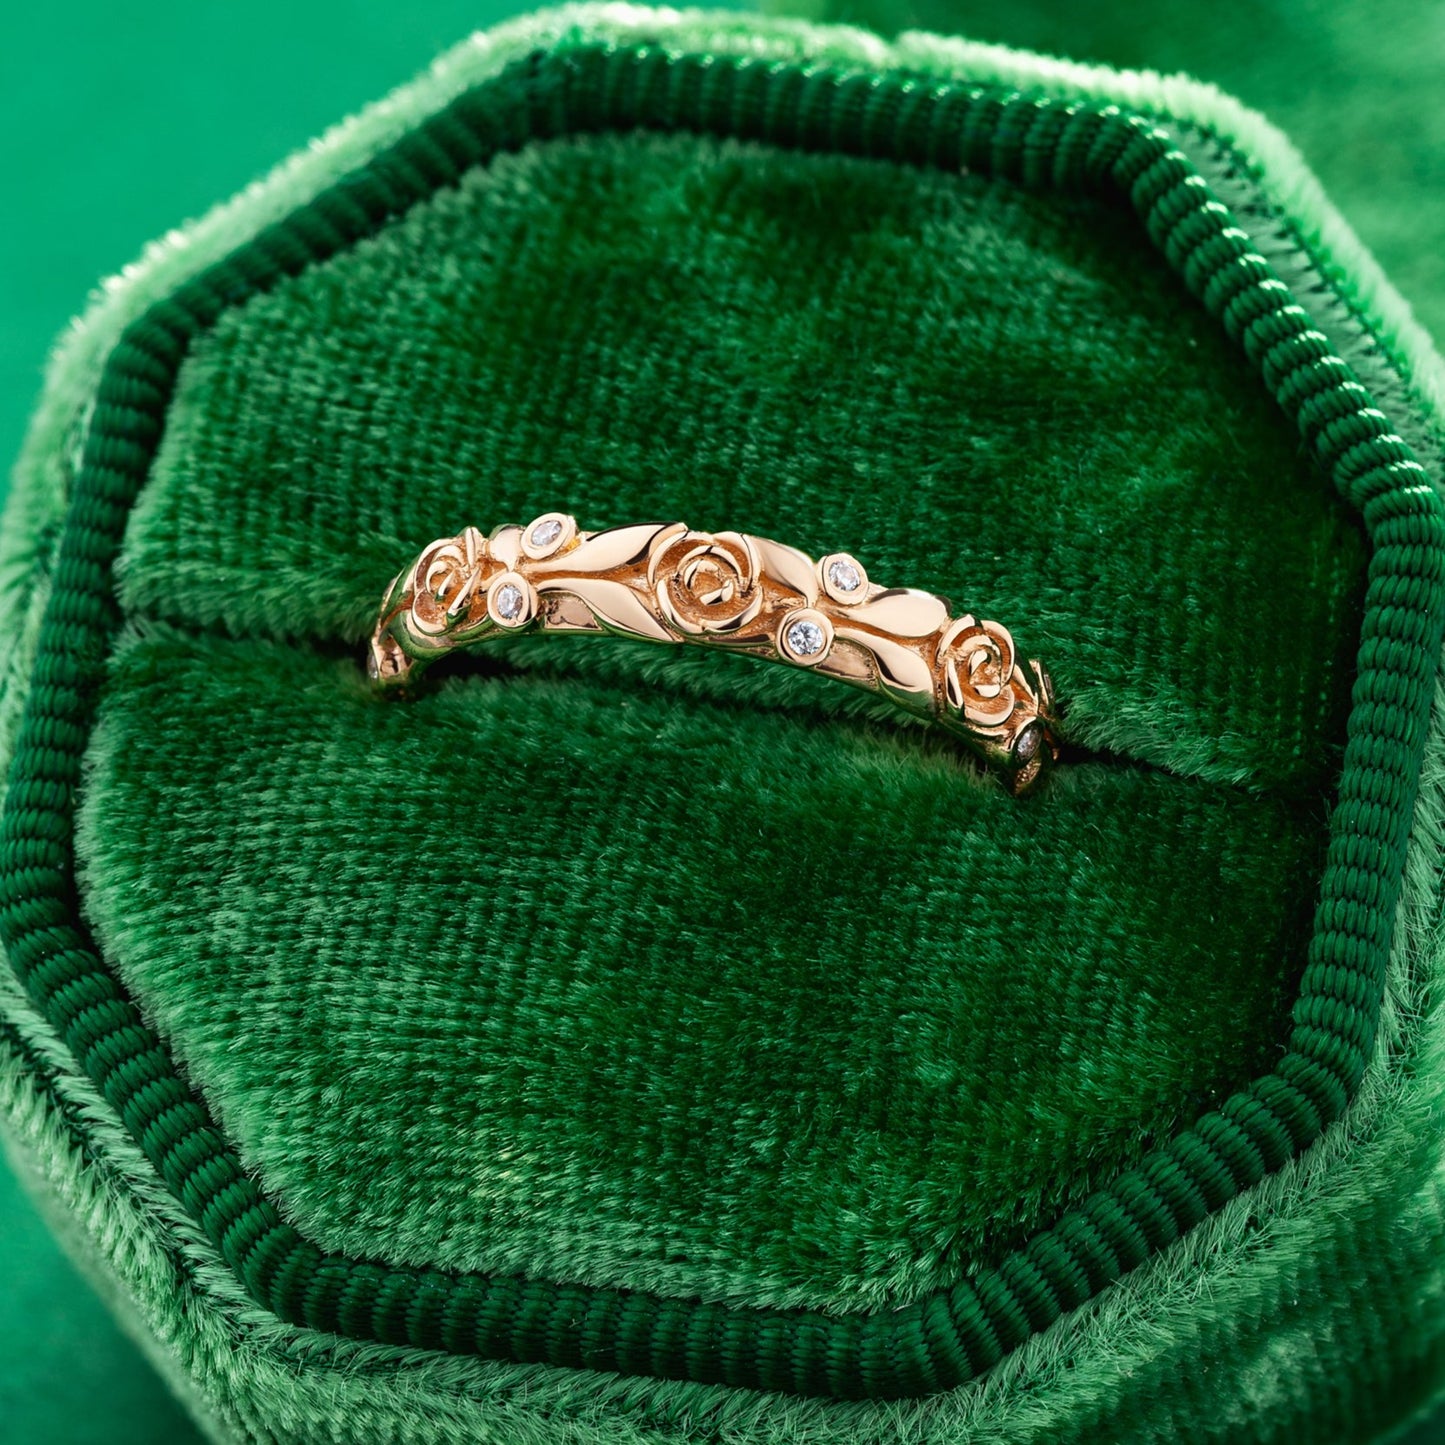 Women's wedding band with floral details, wedding ring with roses, flowers wedding band, women's gold ring, rustic wedding band, boho wedding ring